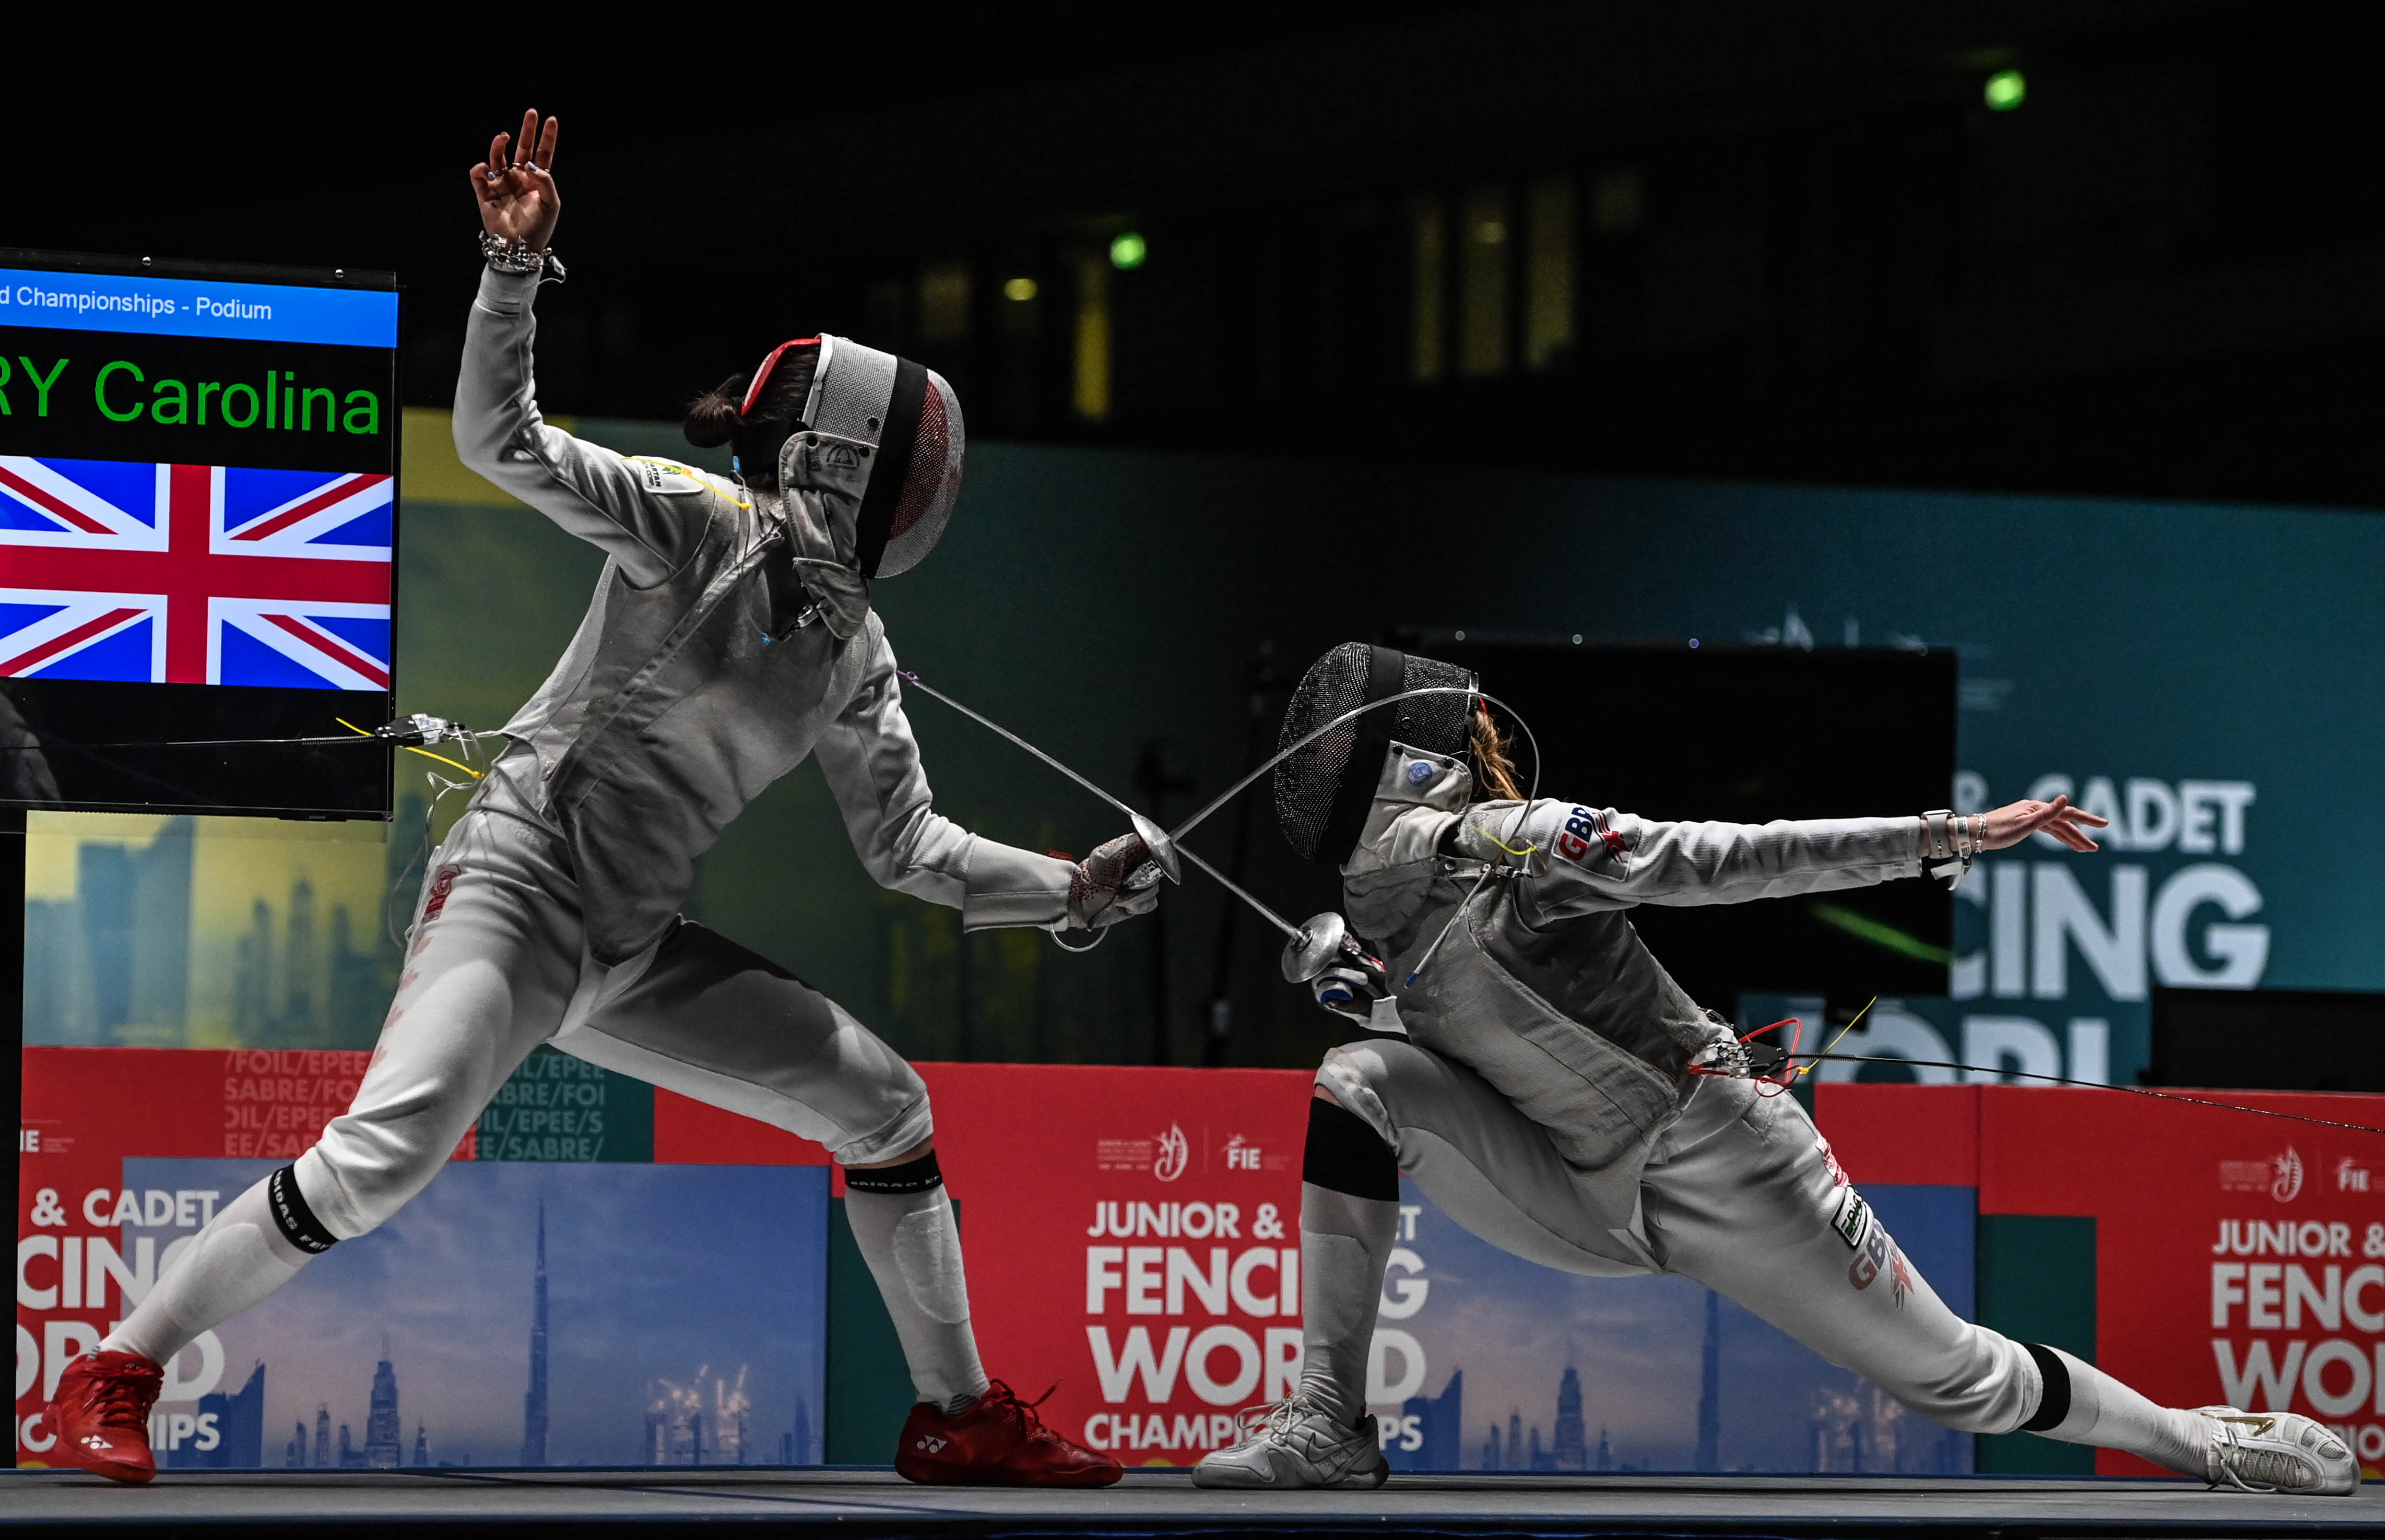 Stutchbury fencing against Guo from Canada in the final of the Cadet women's foil event in Dubai, 2022